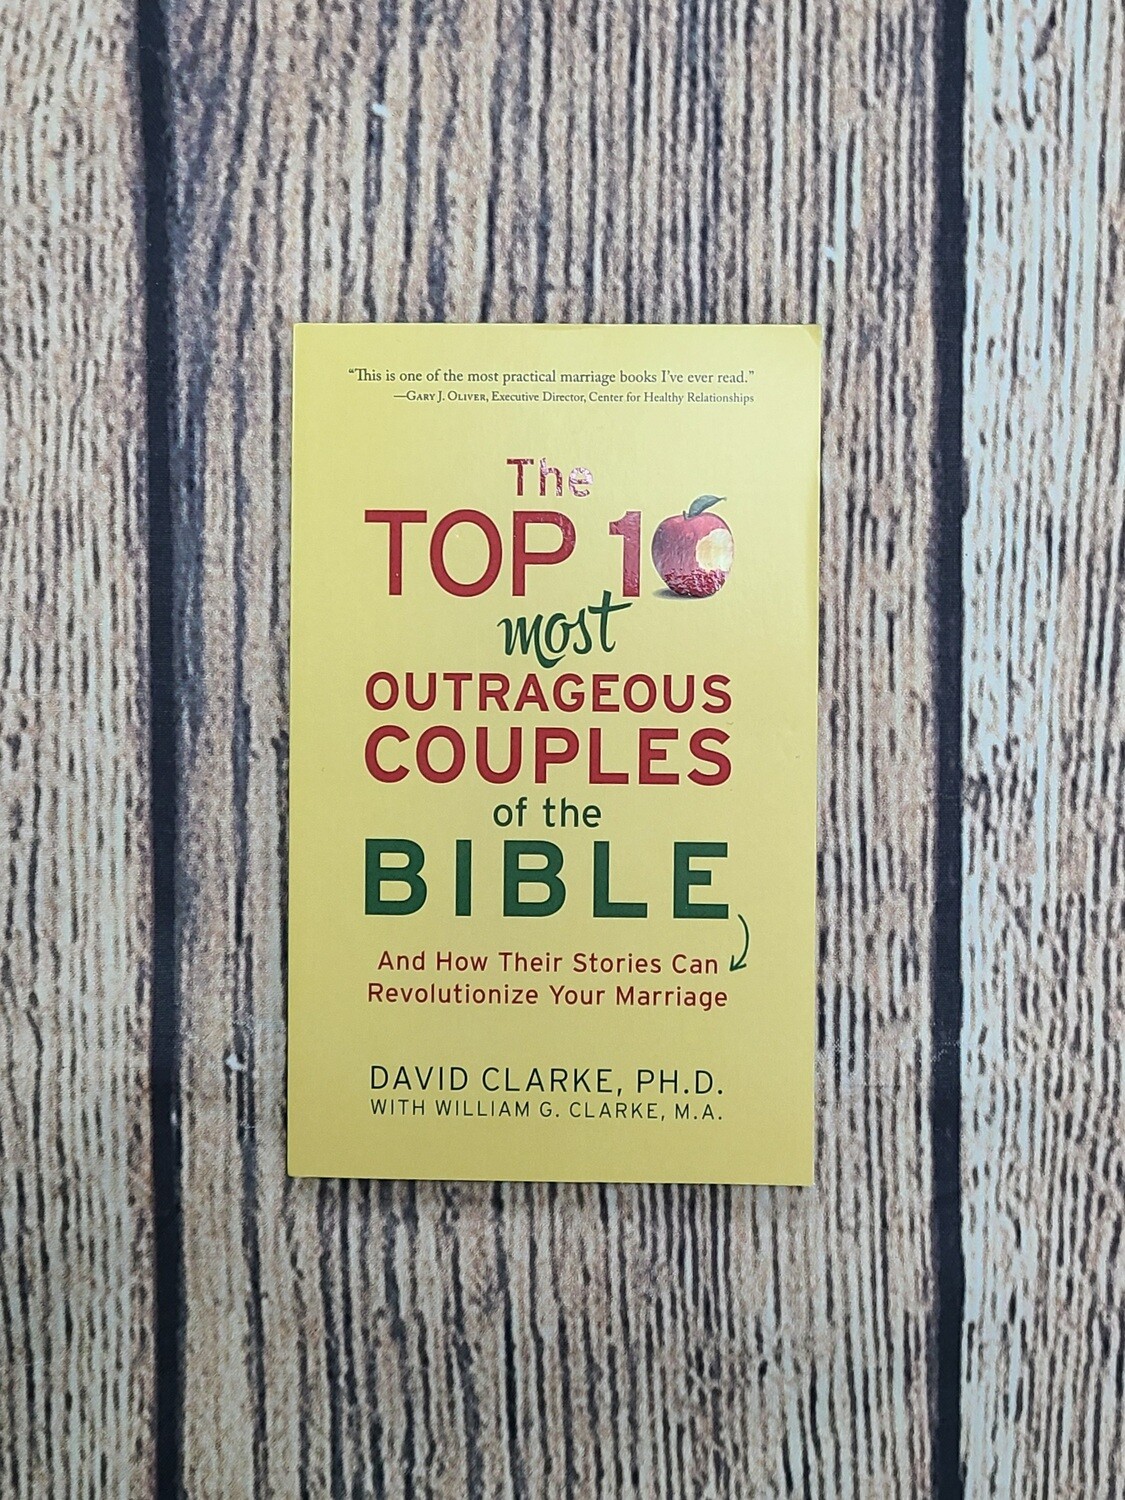 The Top 10 Most Outrageous Couples of the Bible and How Their Stories Can Revolutionize Your Marriage by David Clarke with Willian G. Clarke